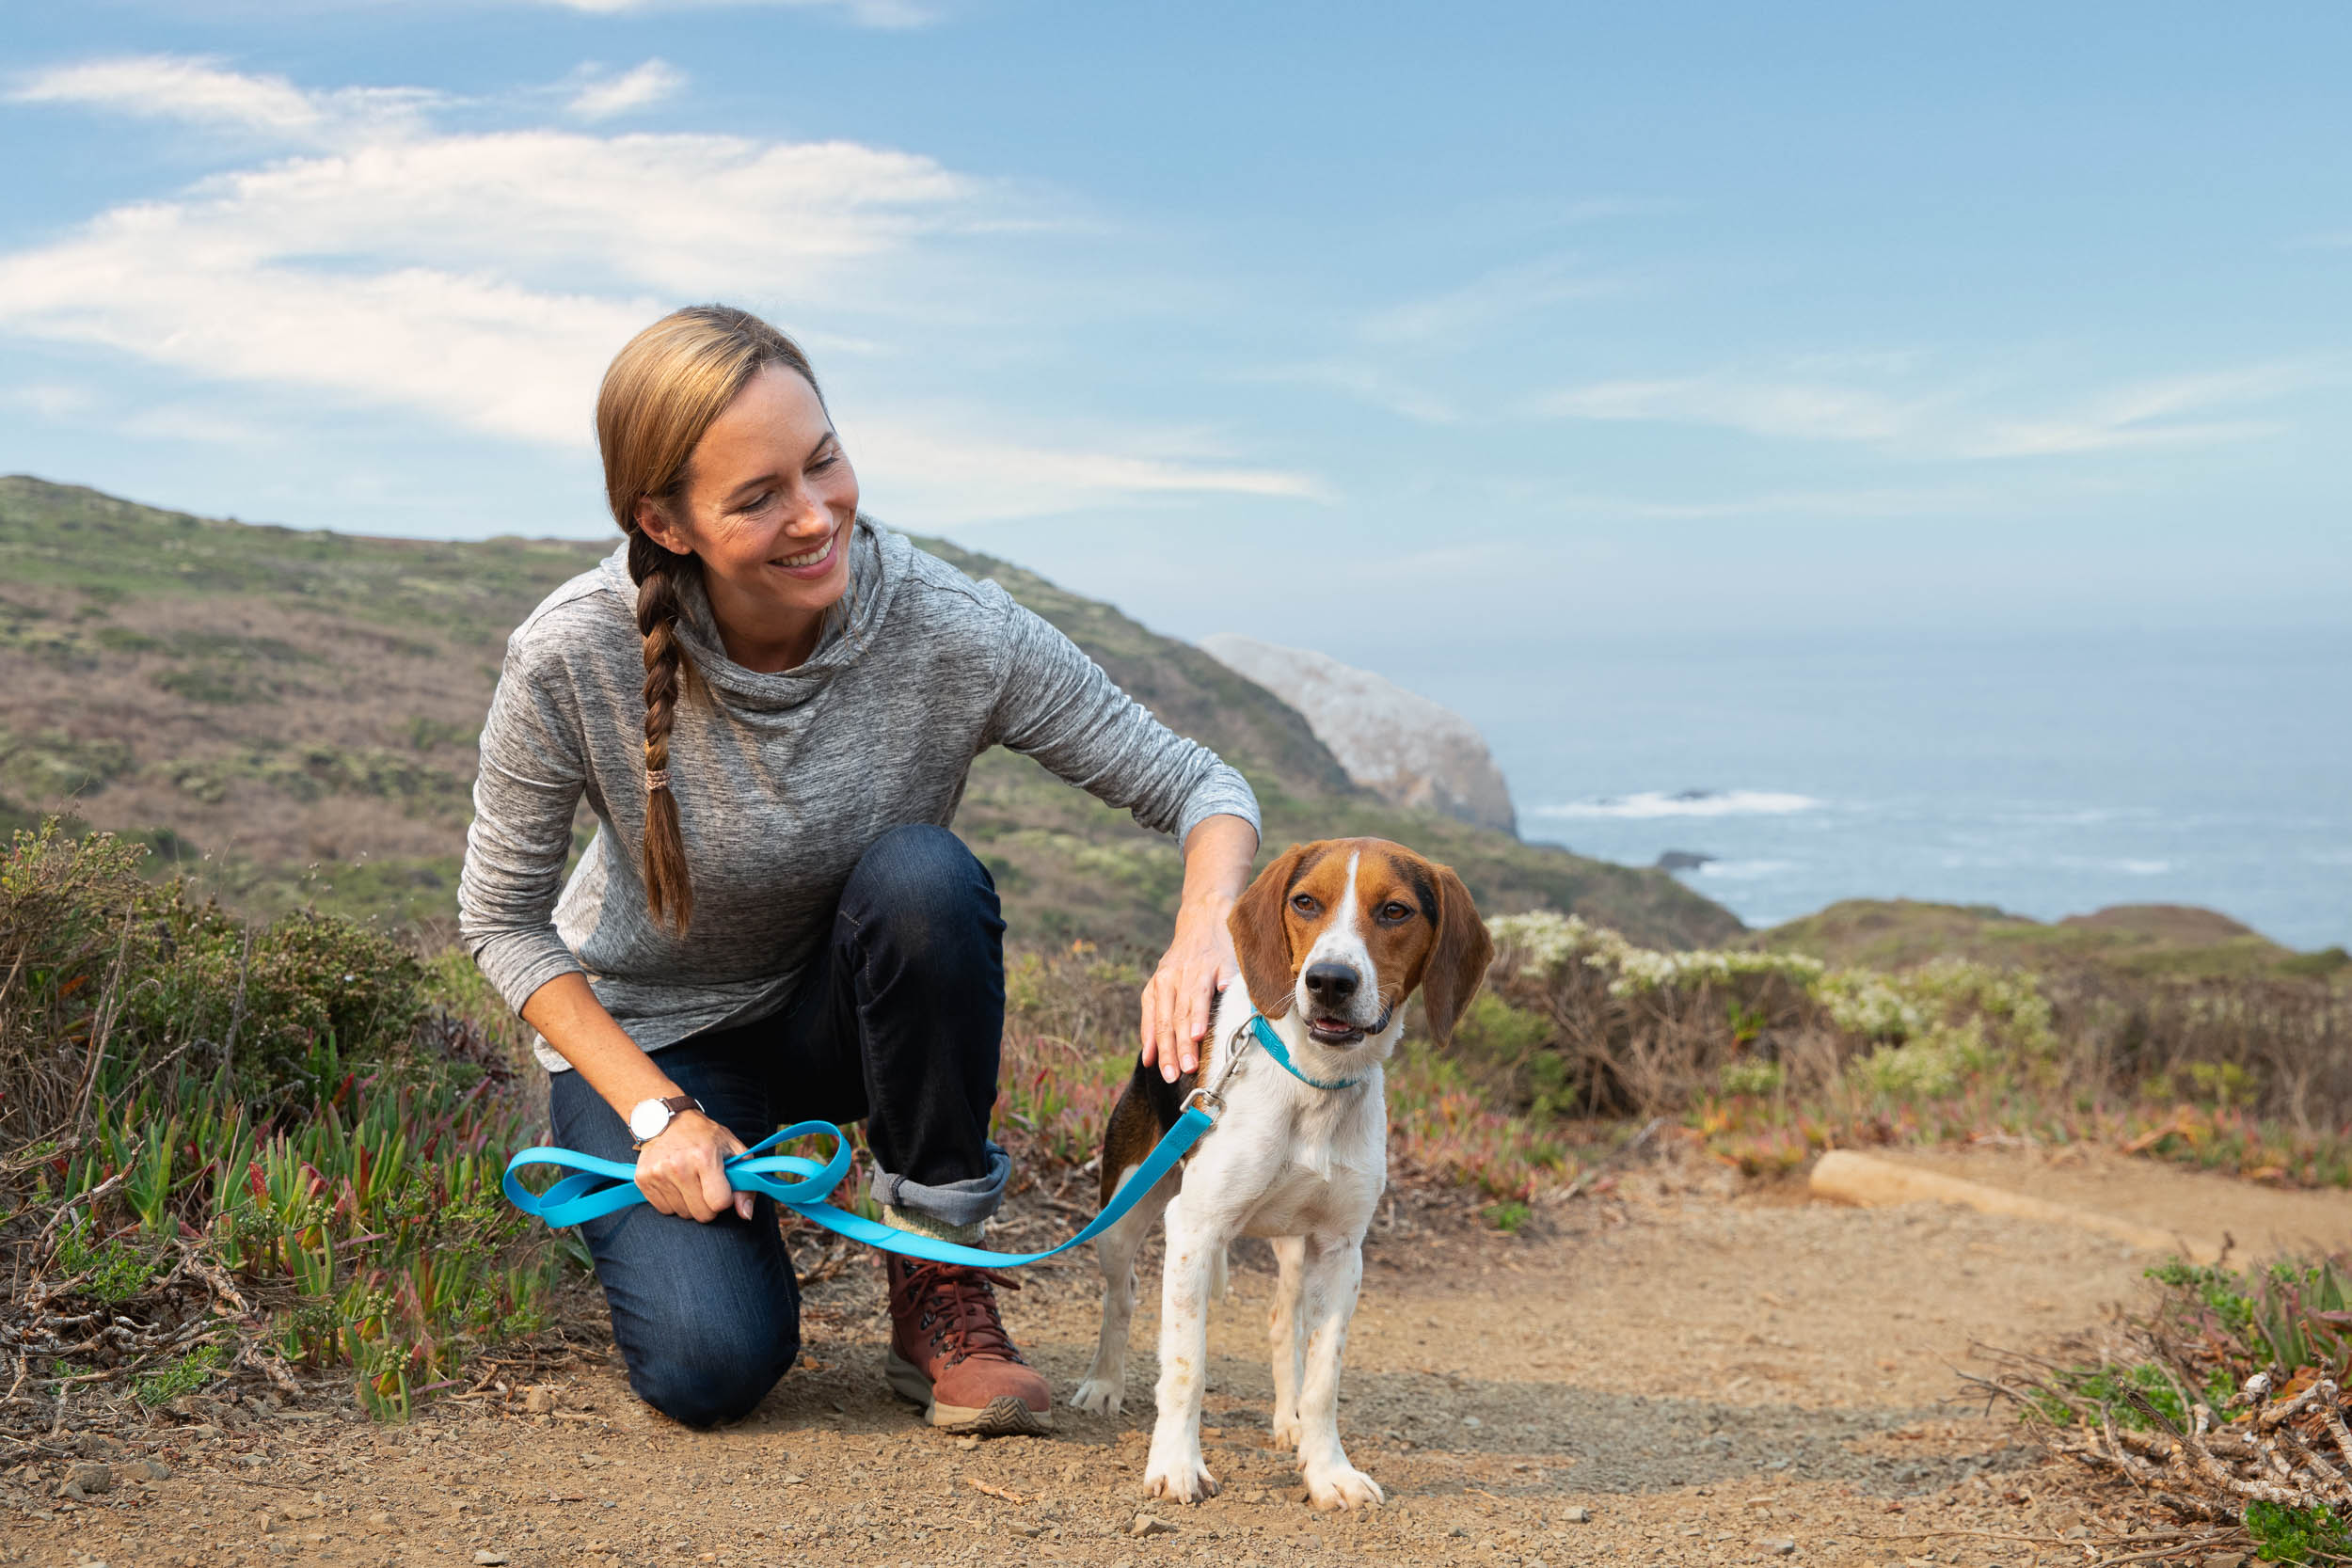 Pet and People Photo | Woman On Trail with Beagle by Mark Rogers